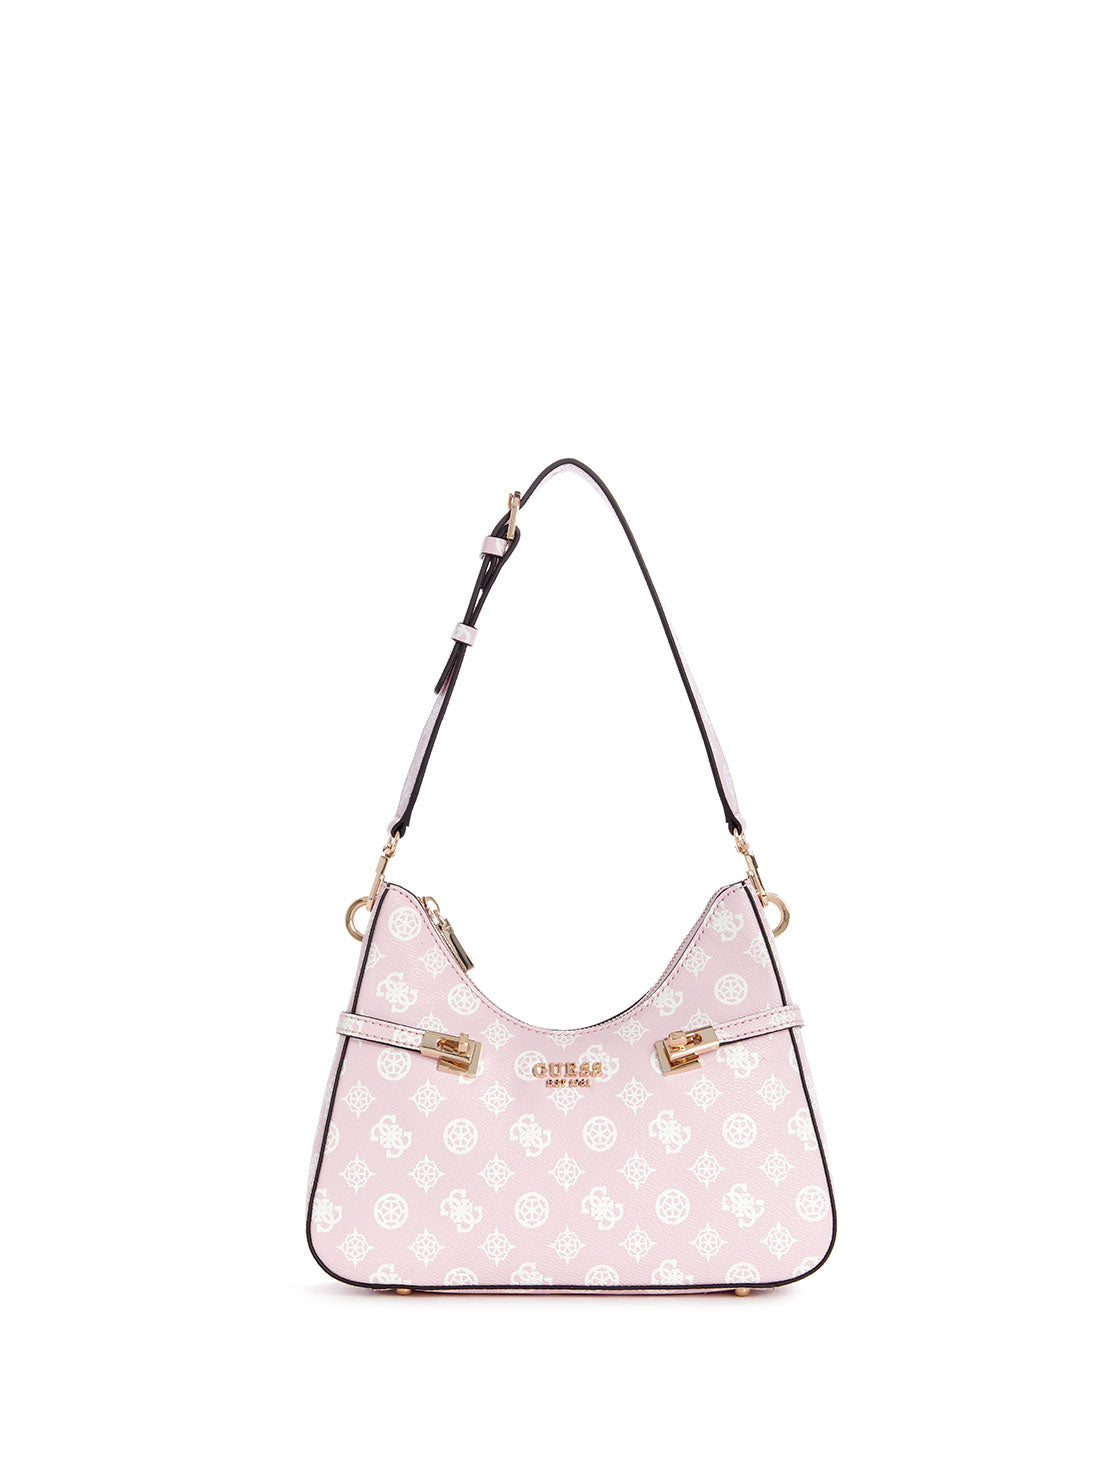 GUESS Pink Logo Loralee Hobo Bag front view